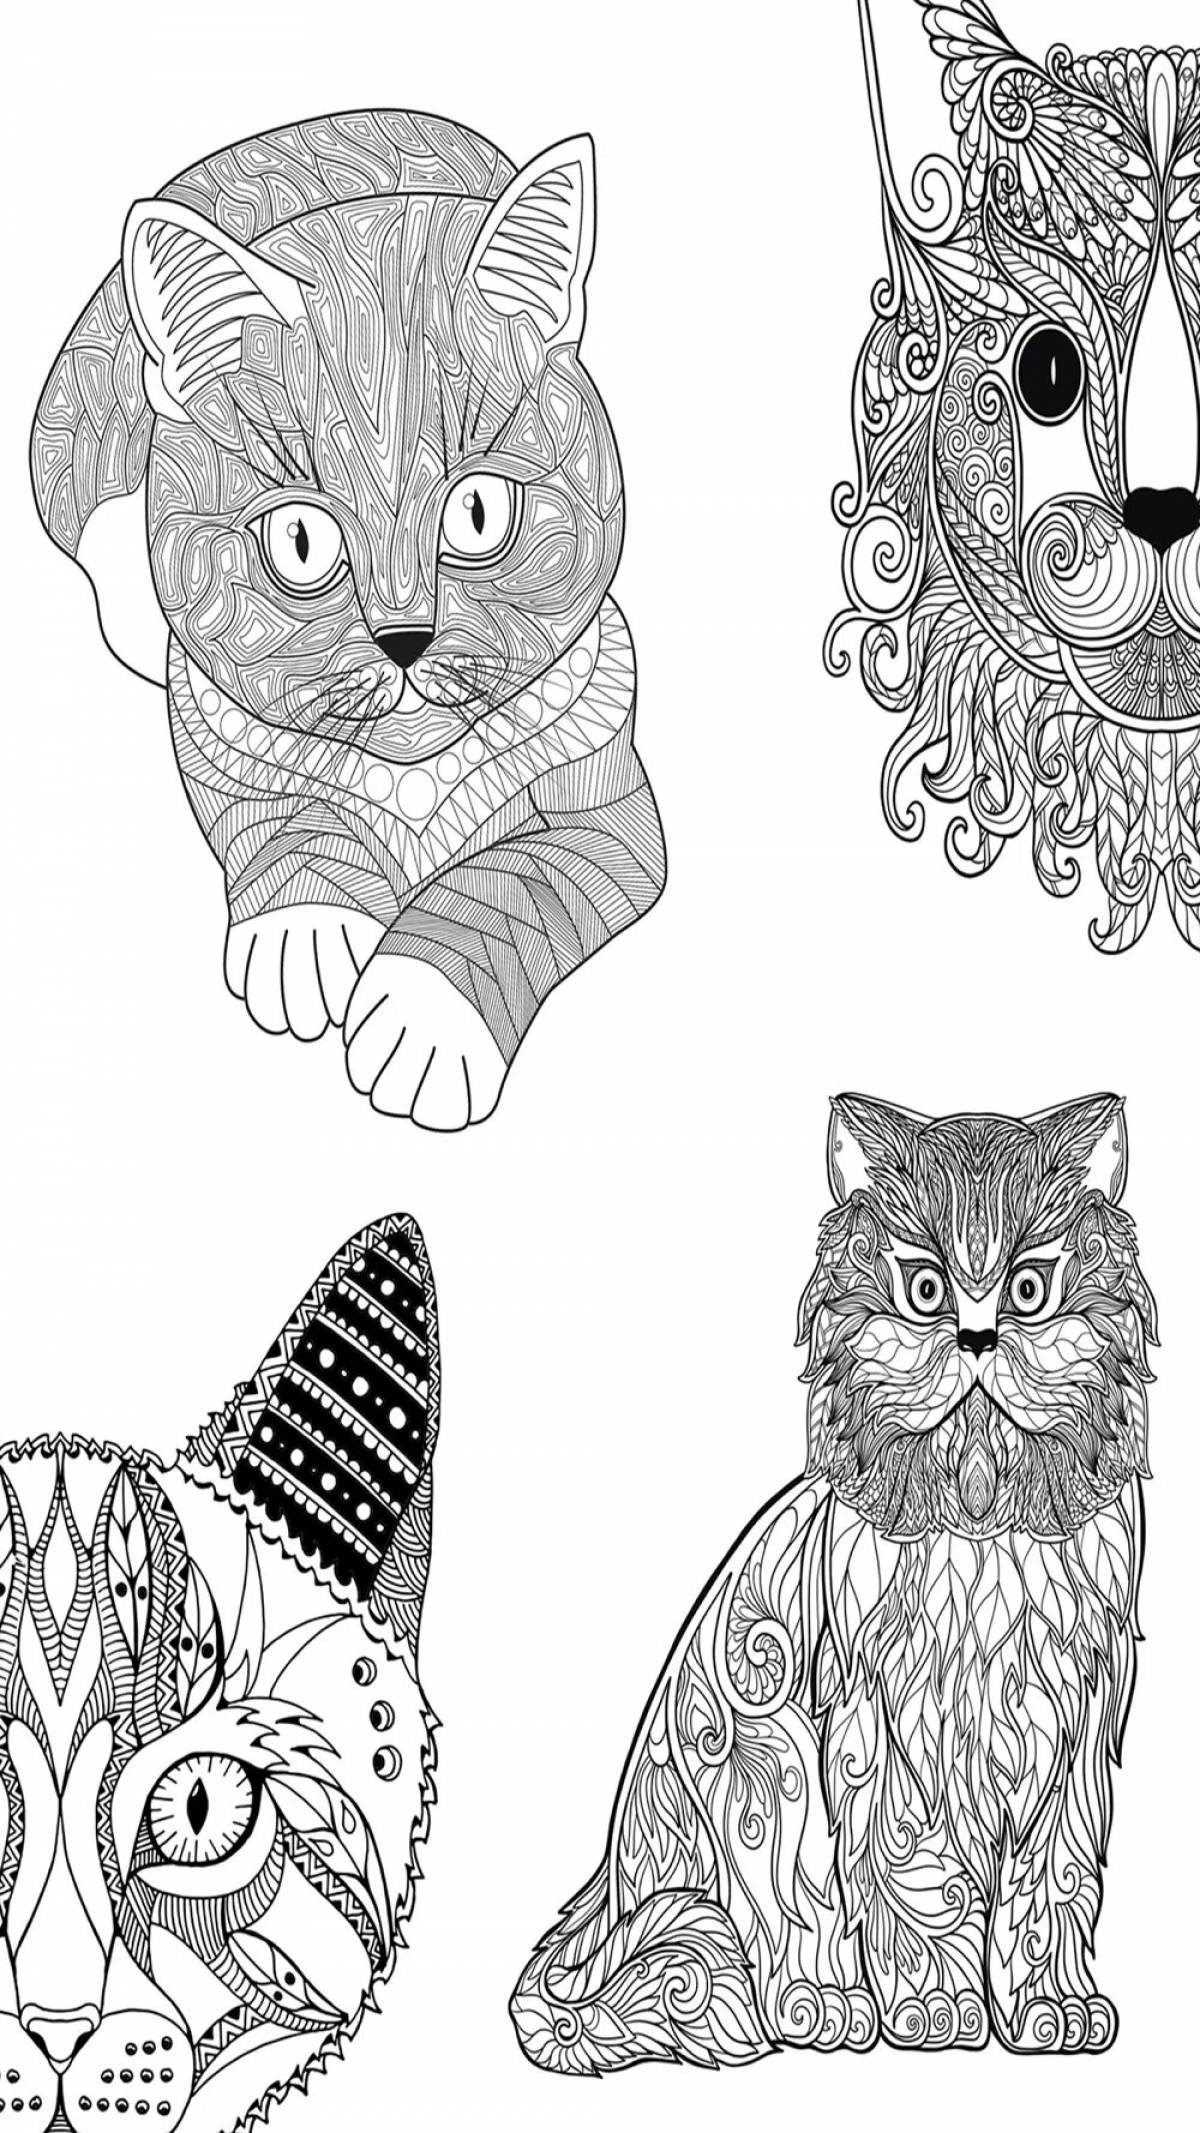 Coloring cat with live pattern